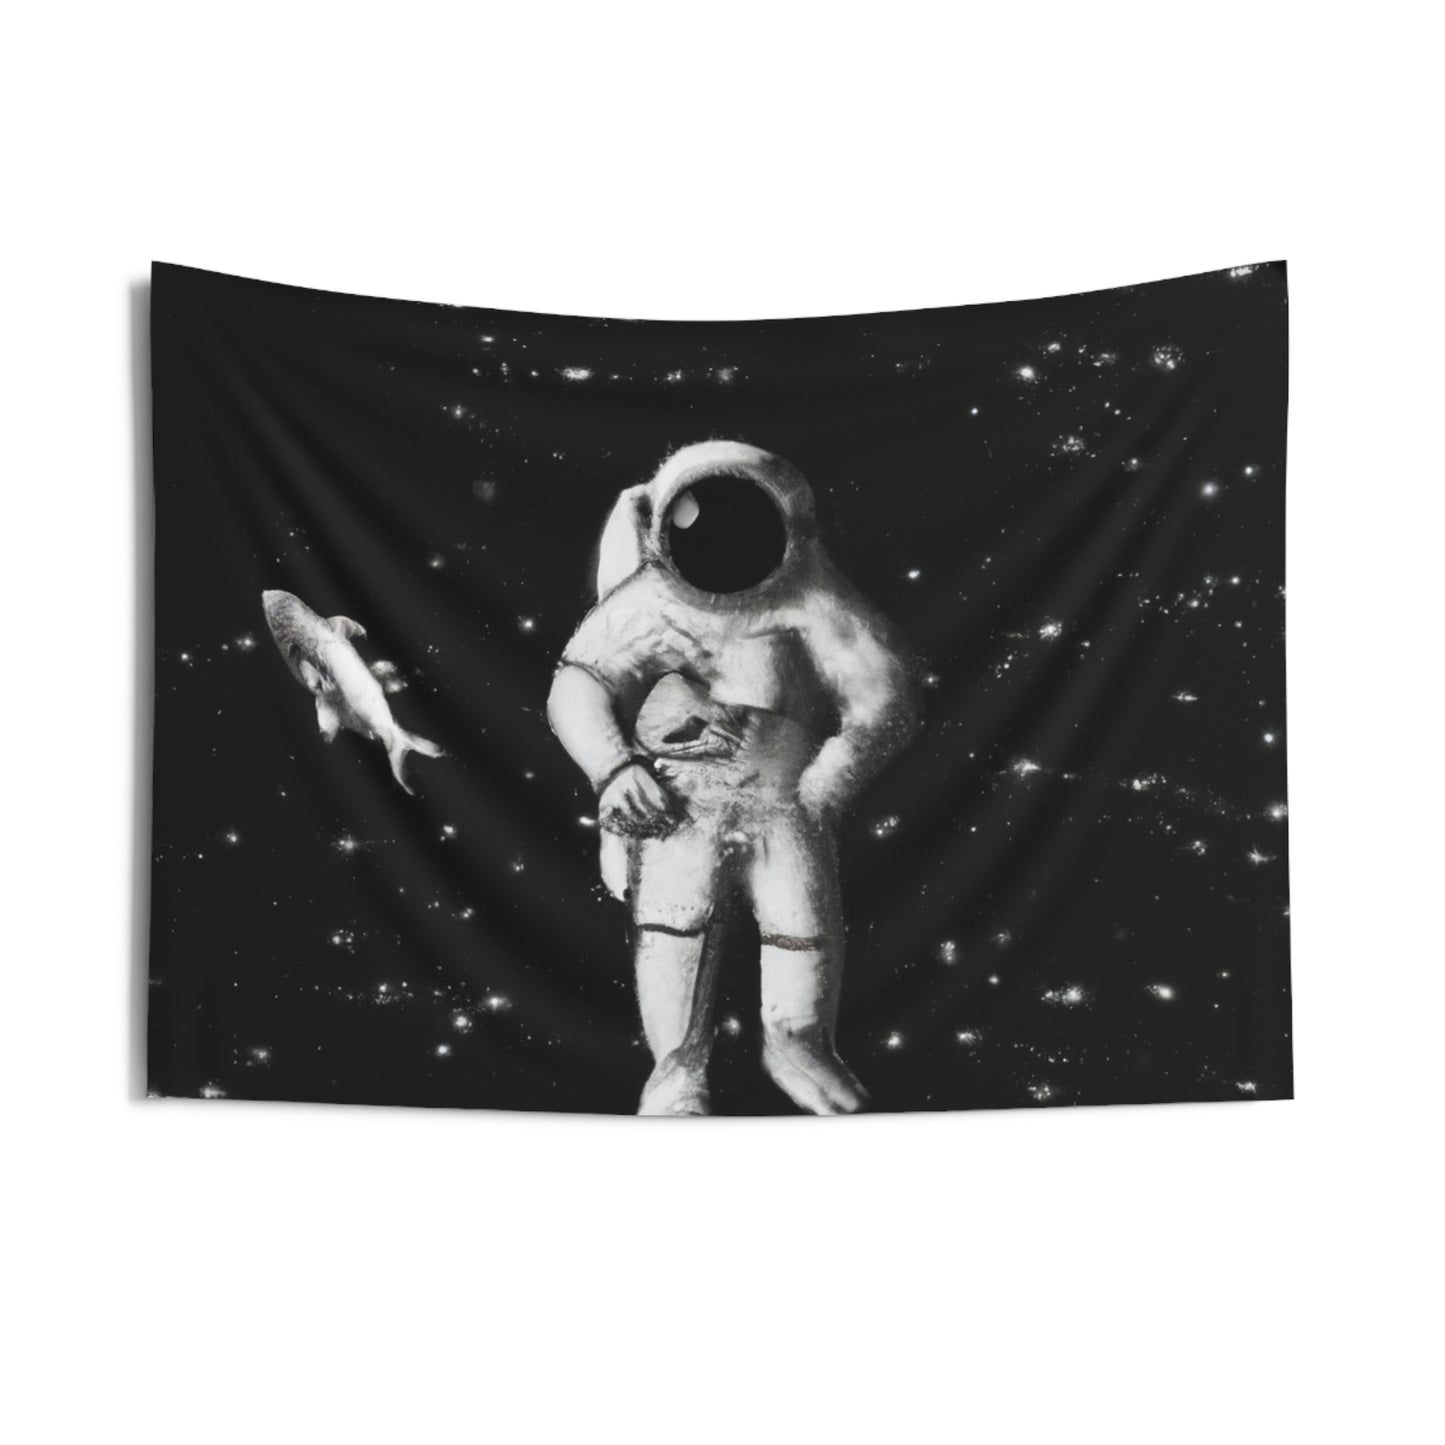 "A Celestial Sea Dance" - The Alien Wall Tapestries